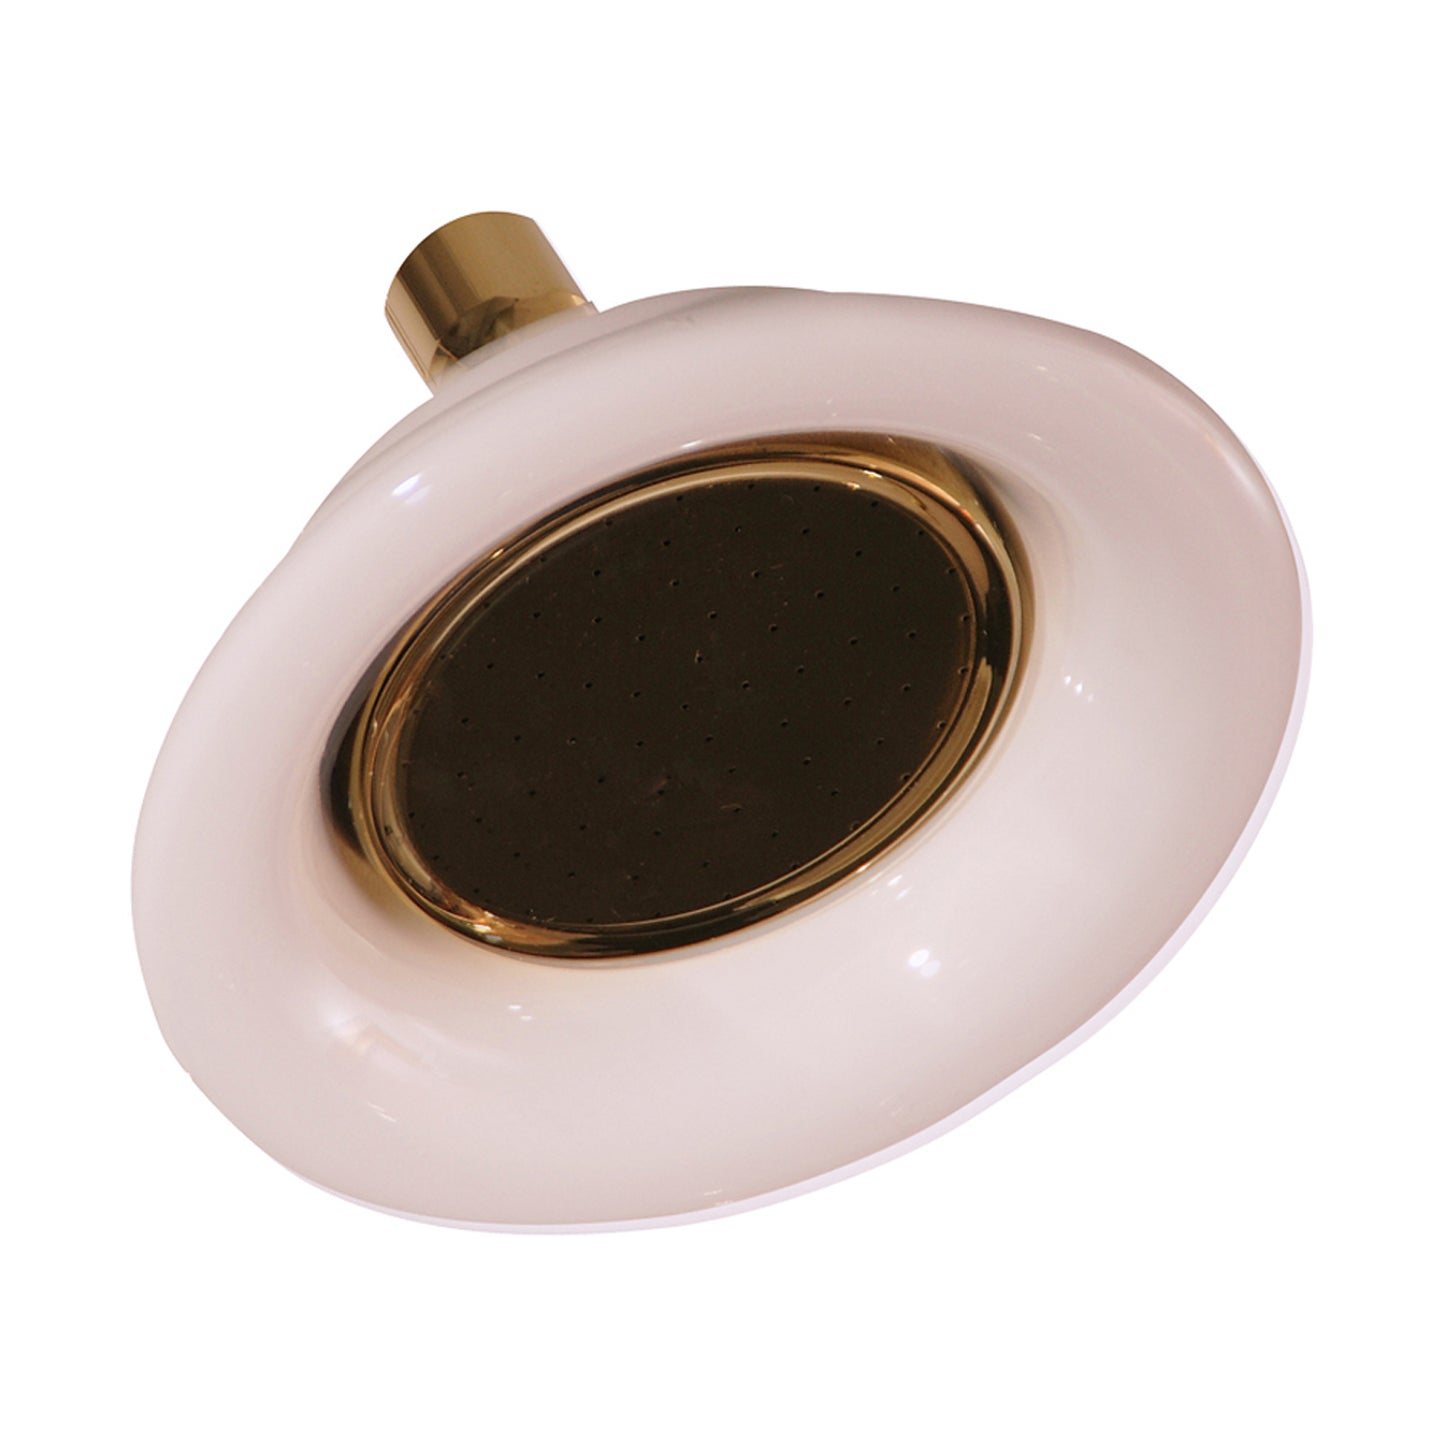 6-1/4" Sunflower Shower Head Polished Brass with White Porcelain